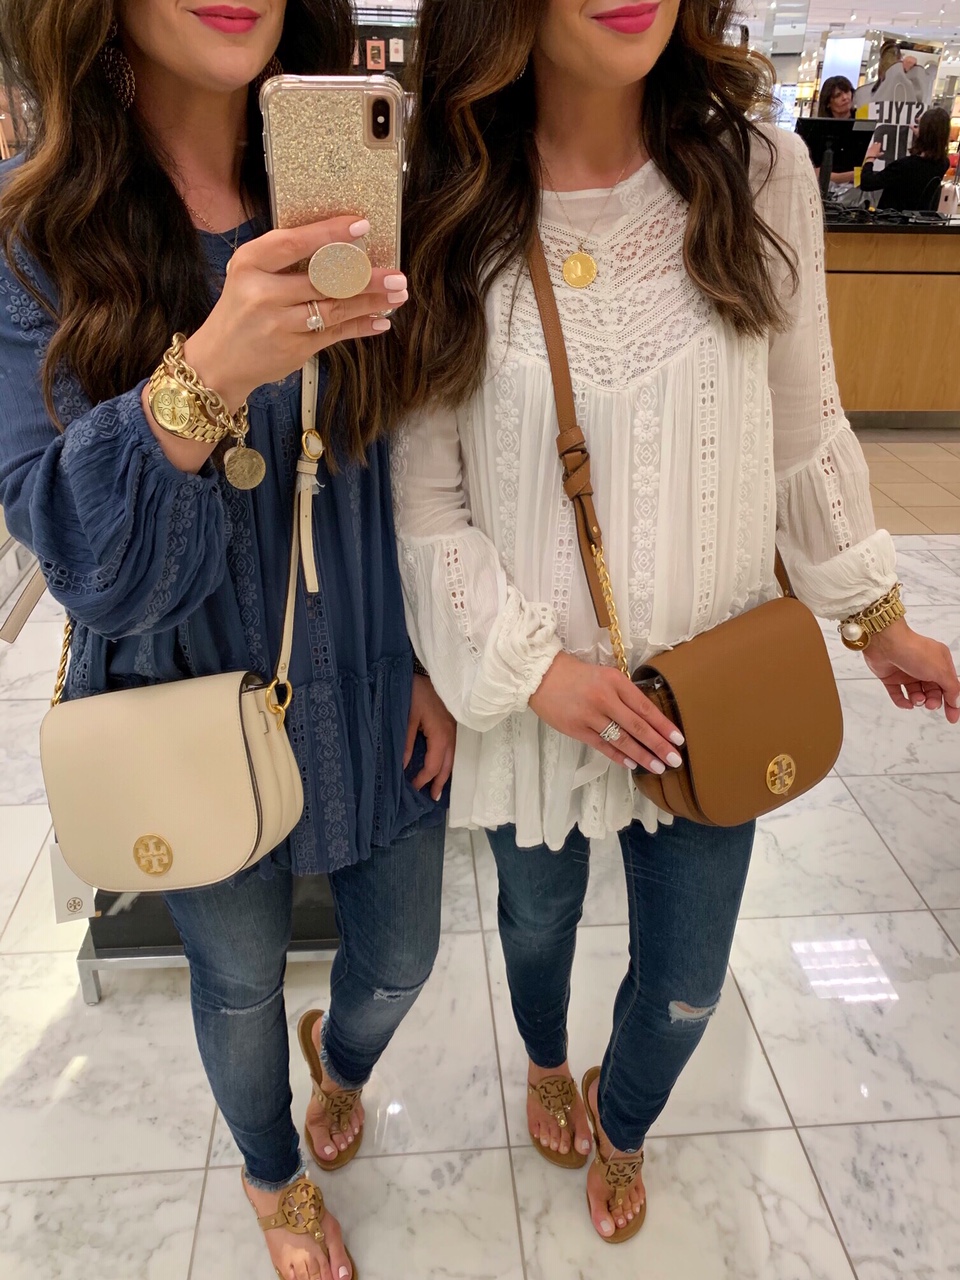 New November Tory Burch Markdowns! - The Double Take Girls